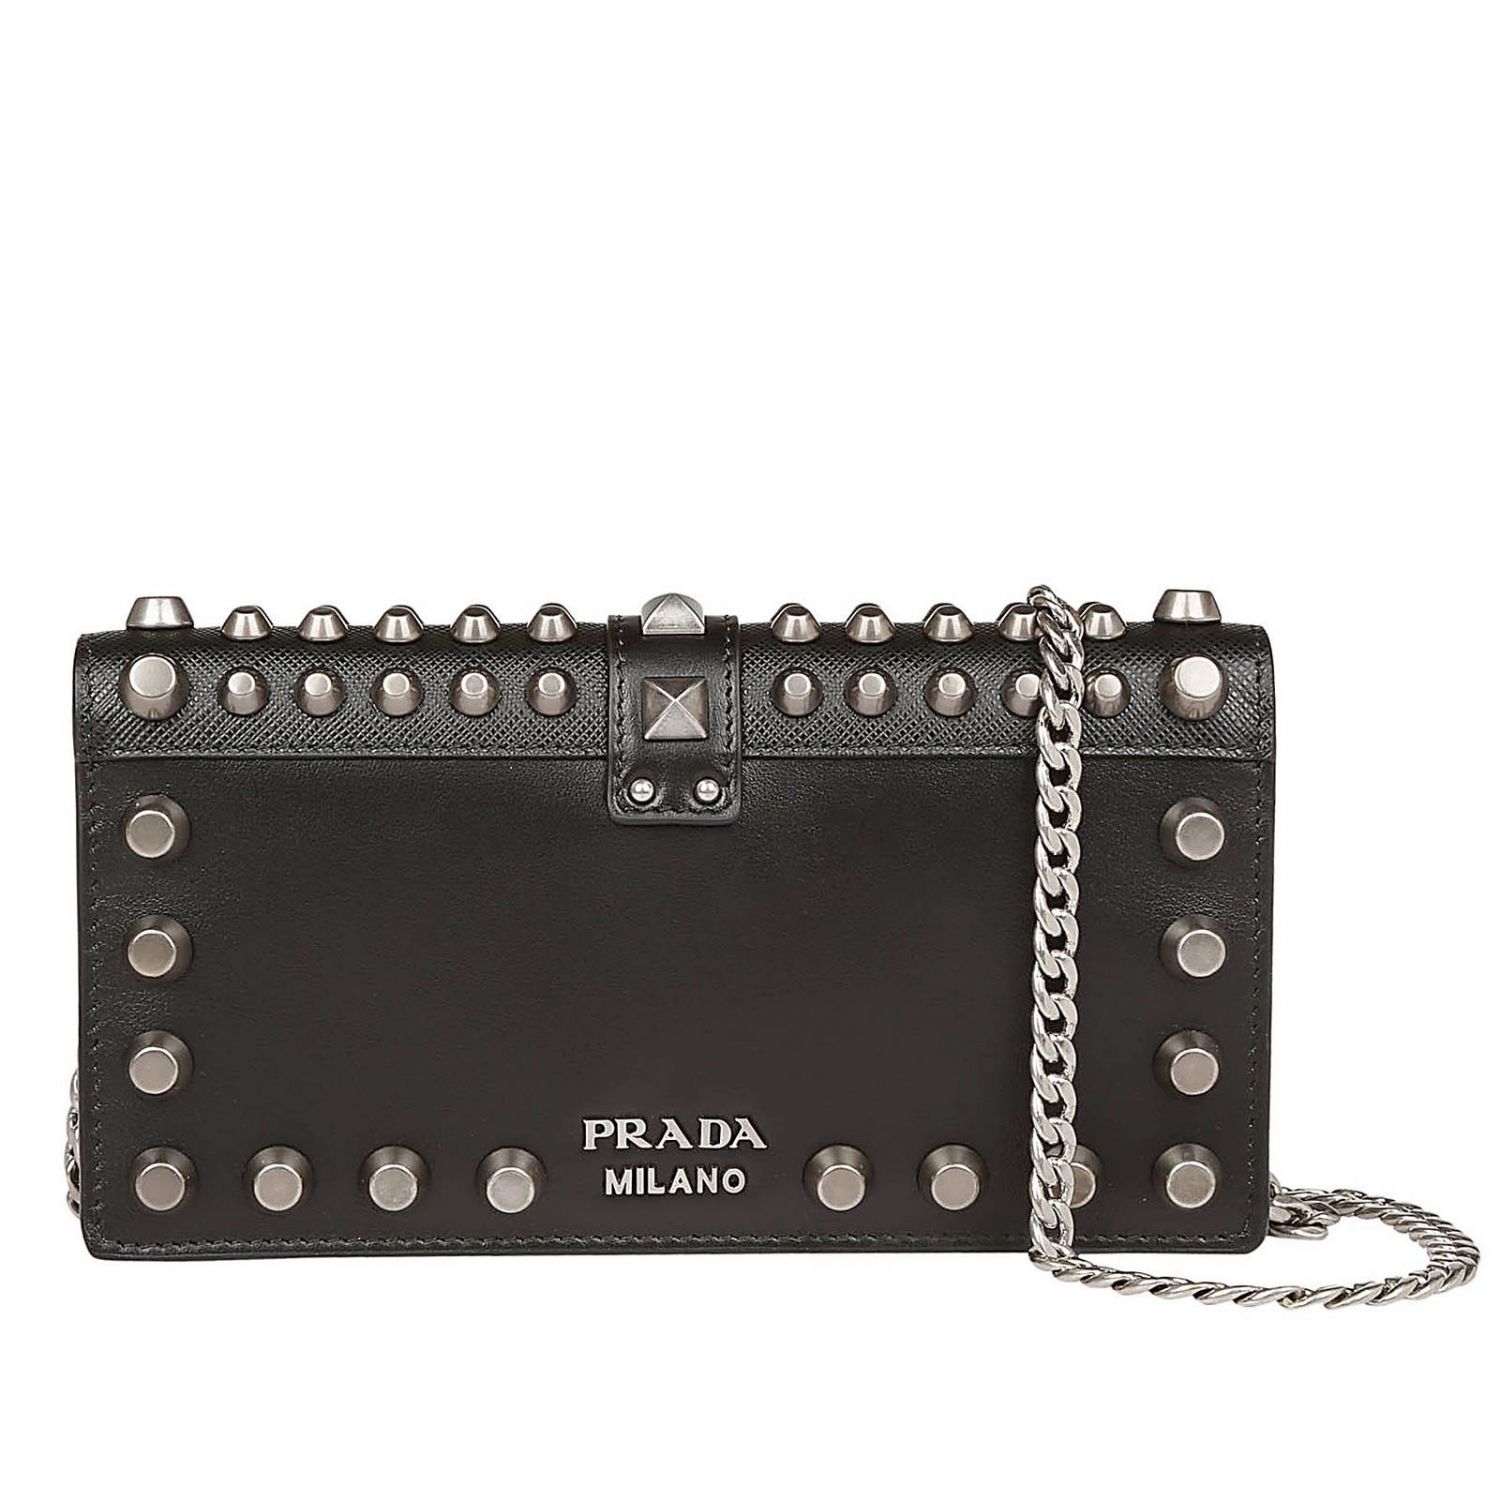 Prada Mini Bandoliera bag in smooth leather with all-over studs and